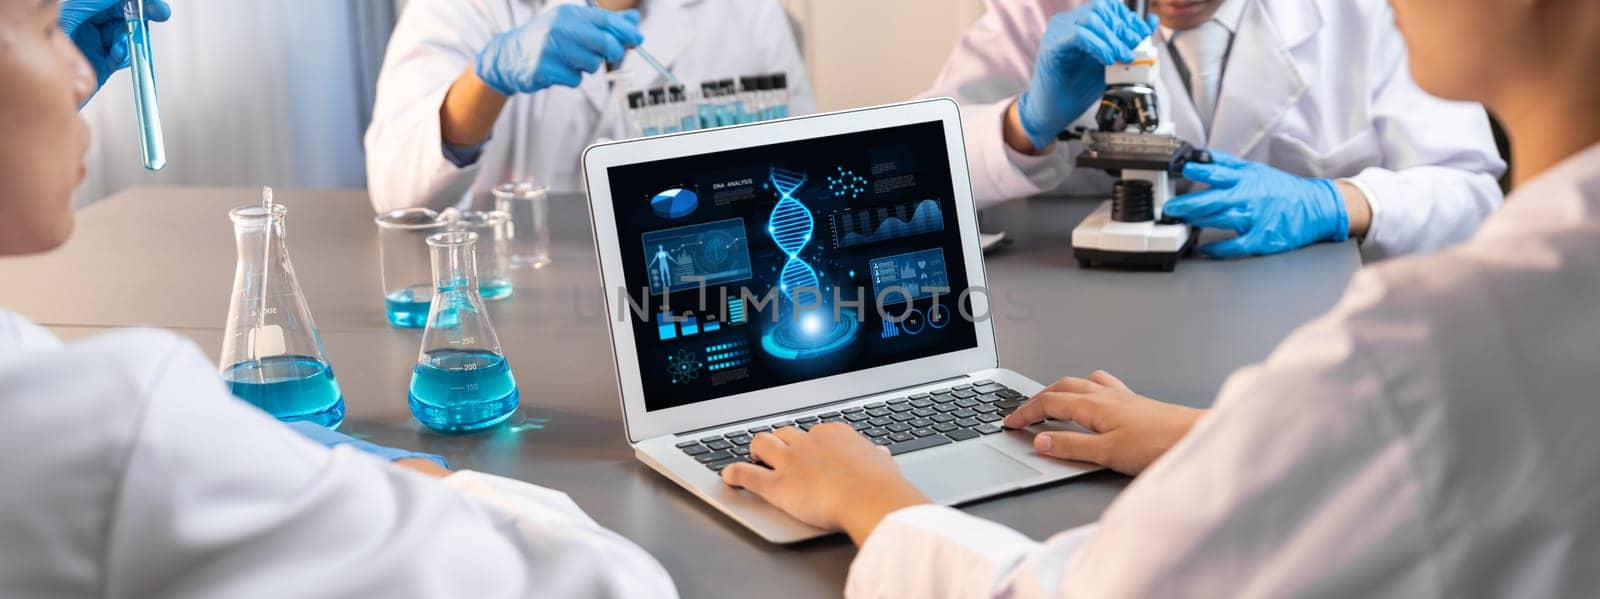 Dedicated scientist group working on advance biotechnology computer software to study or analyze DNA data after making scientific breakthrough from chemical experiment on medical laboratory. Neoteric